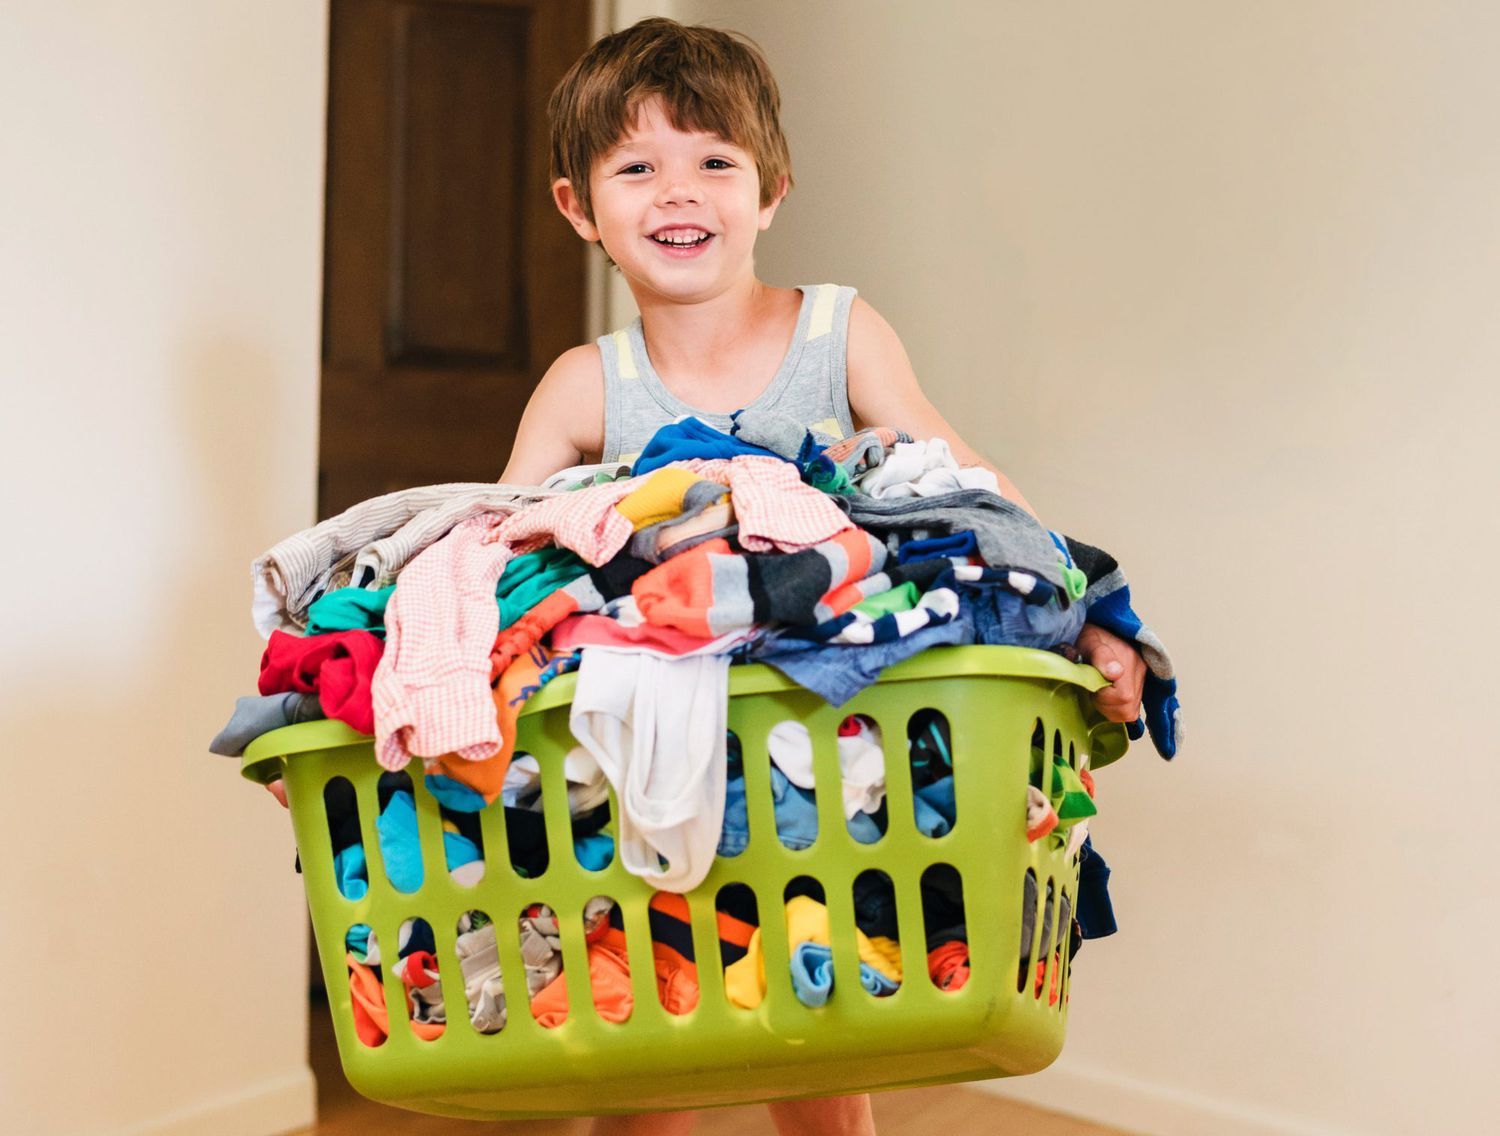 An image of a boy carrying a laundry basket filled with clothes.